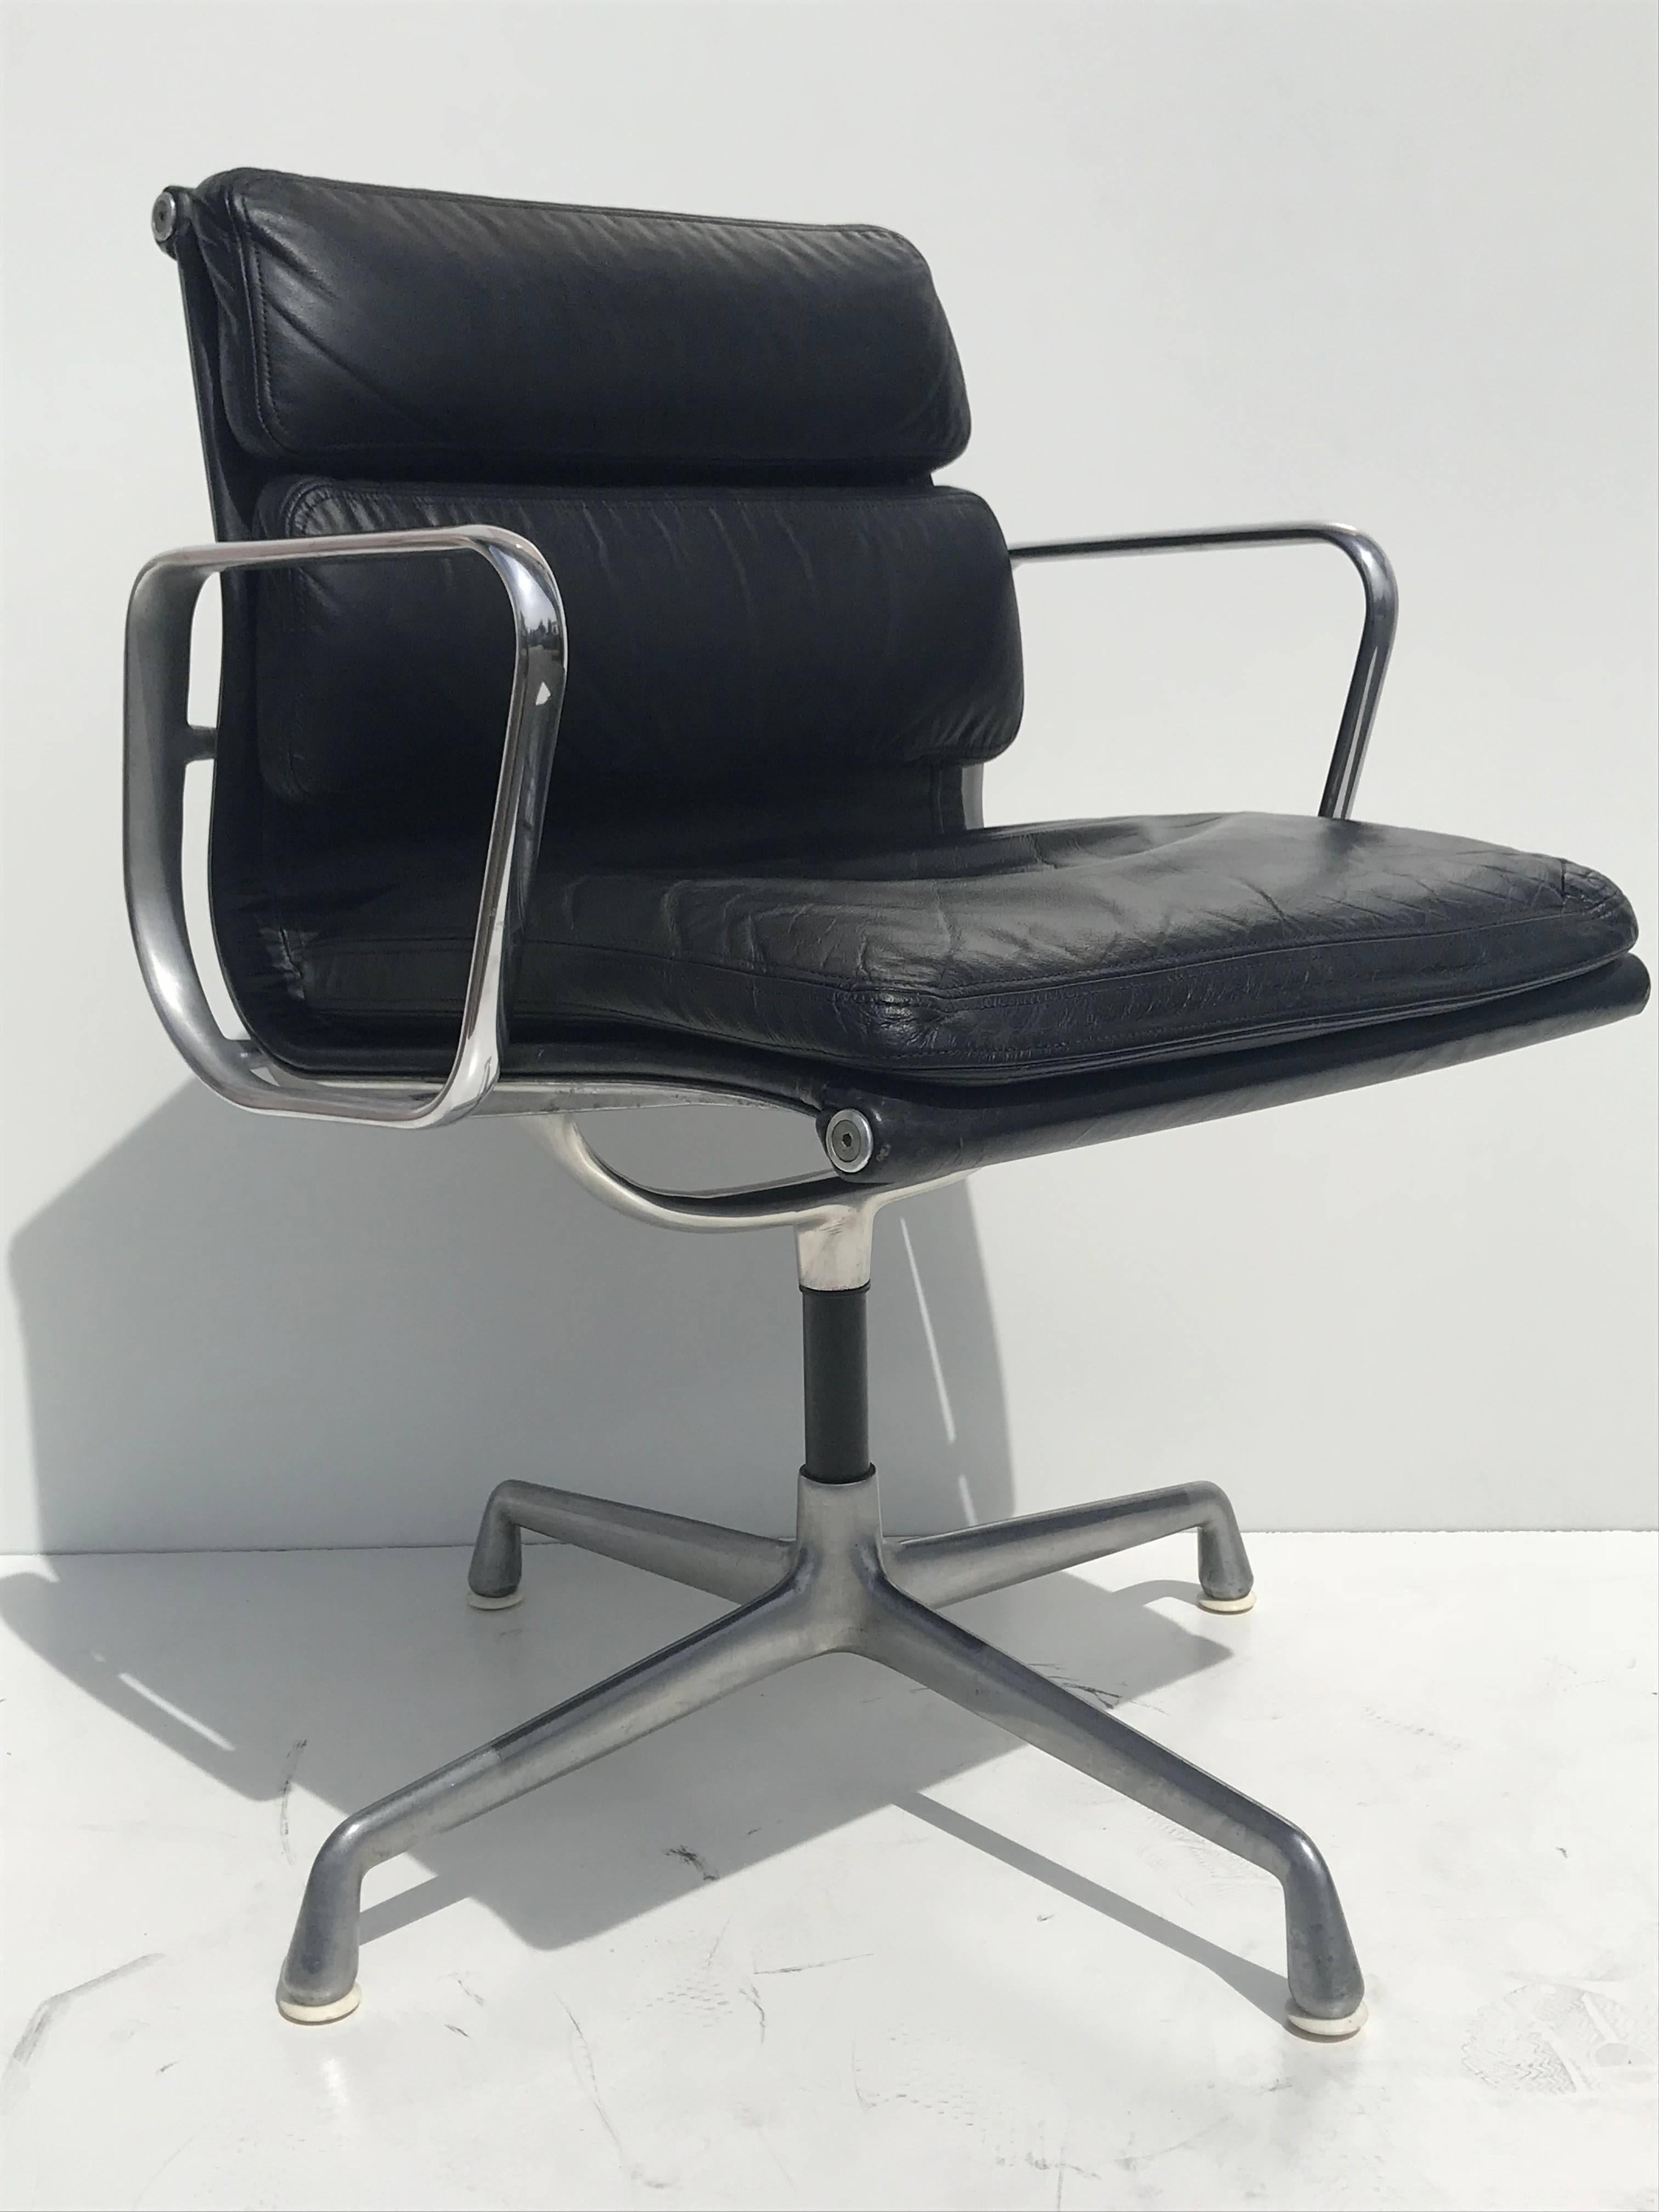 Herman Miller black leather swivelling soft pad chair. With original label stating date of production 1978.
Four available. Price is per chair.